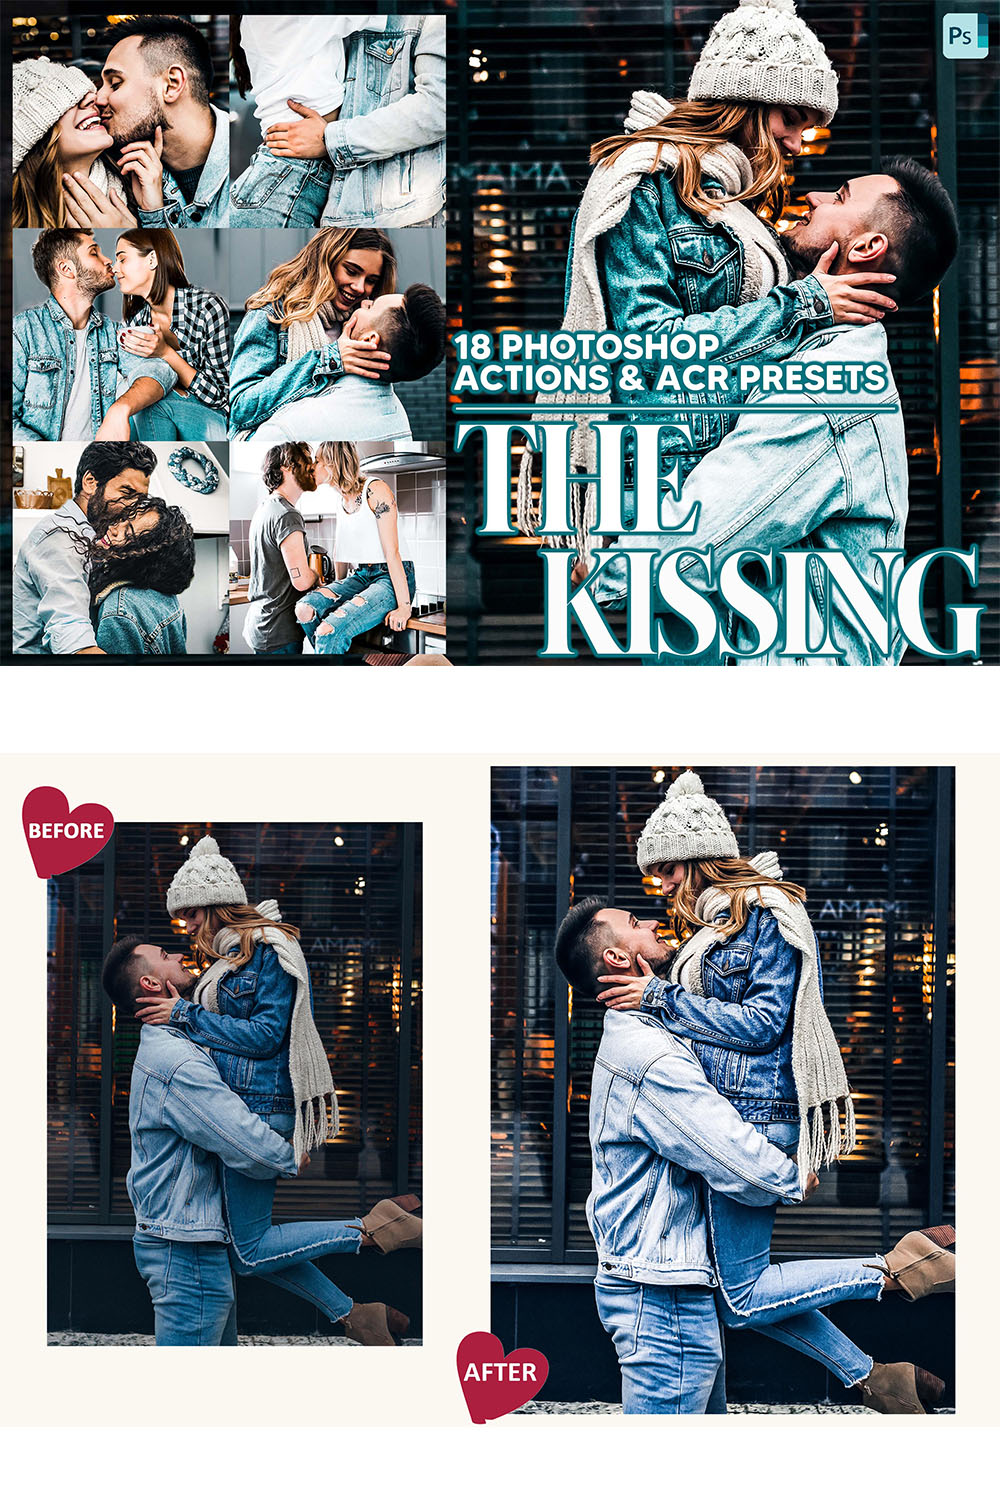 18 Photoshop Actions, The Kissing Ps Action, Romantic ACR Preset, Love Ps Filter, Atn Portrait And Lifestyle Theme For Instagram, Blogger pinterest preview image.